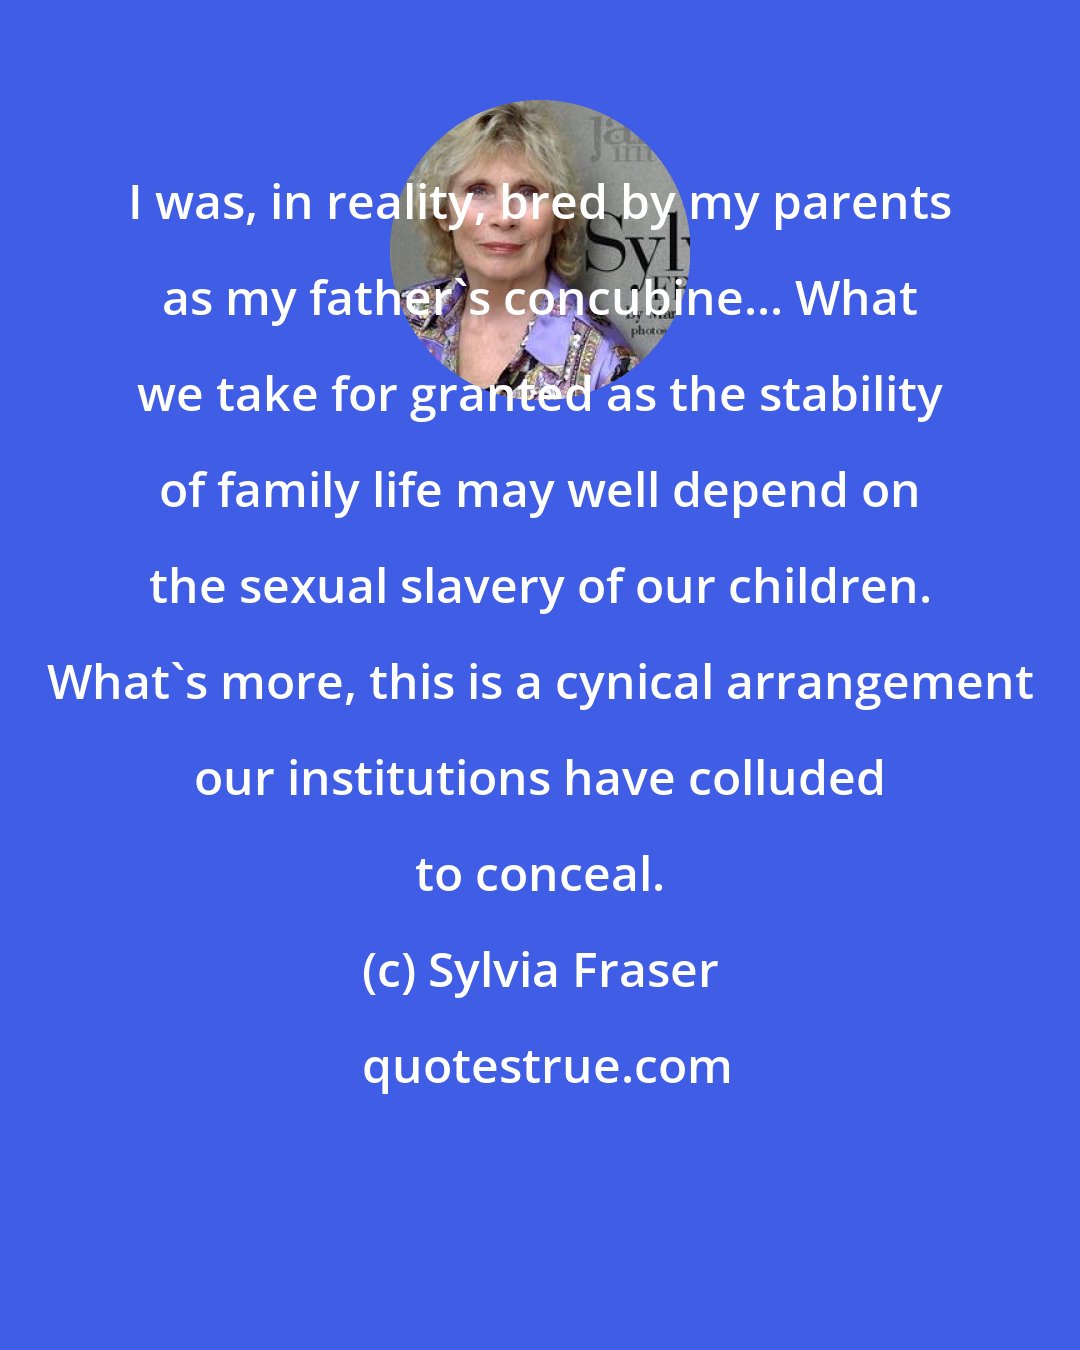 Sylvia Fraser: I was, in reality, bred by my parents as my father's concubine... What we take for granted as the stability of family life may well depend on the sexual slavery of our children. What's more, this is a cynical arrangement our institutions have colluded to conceal.